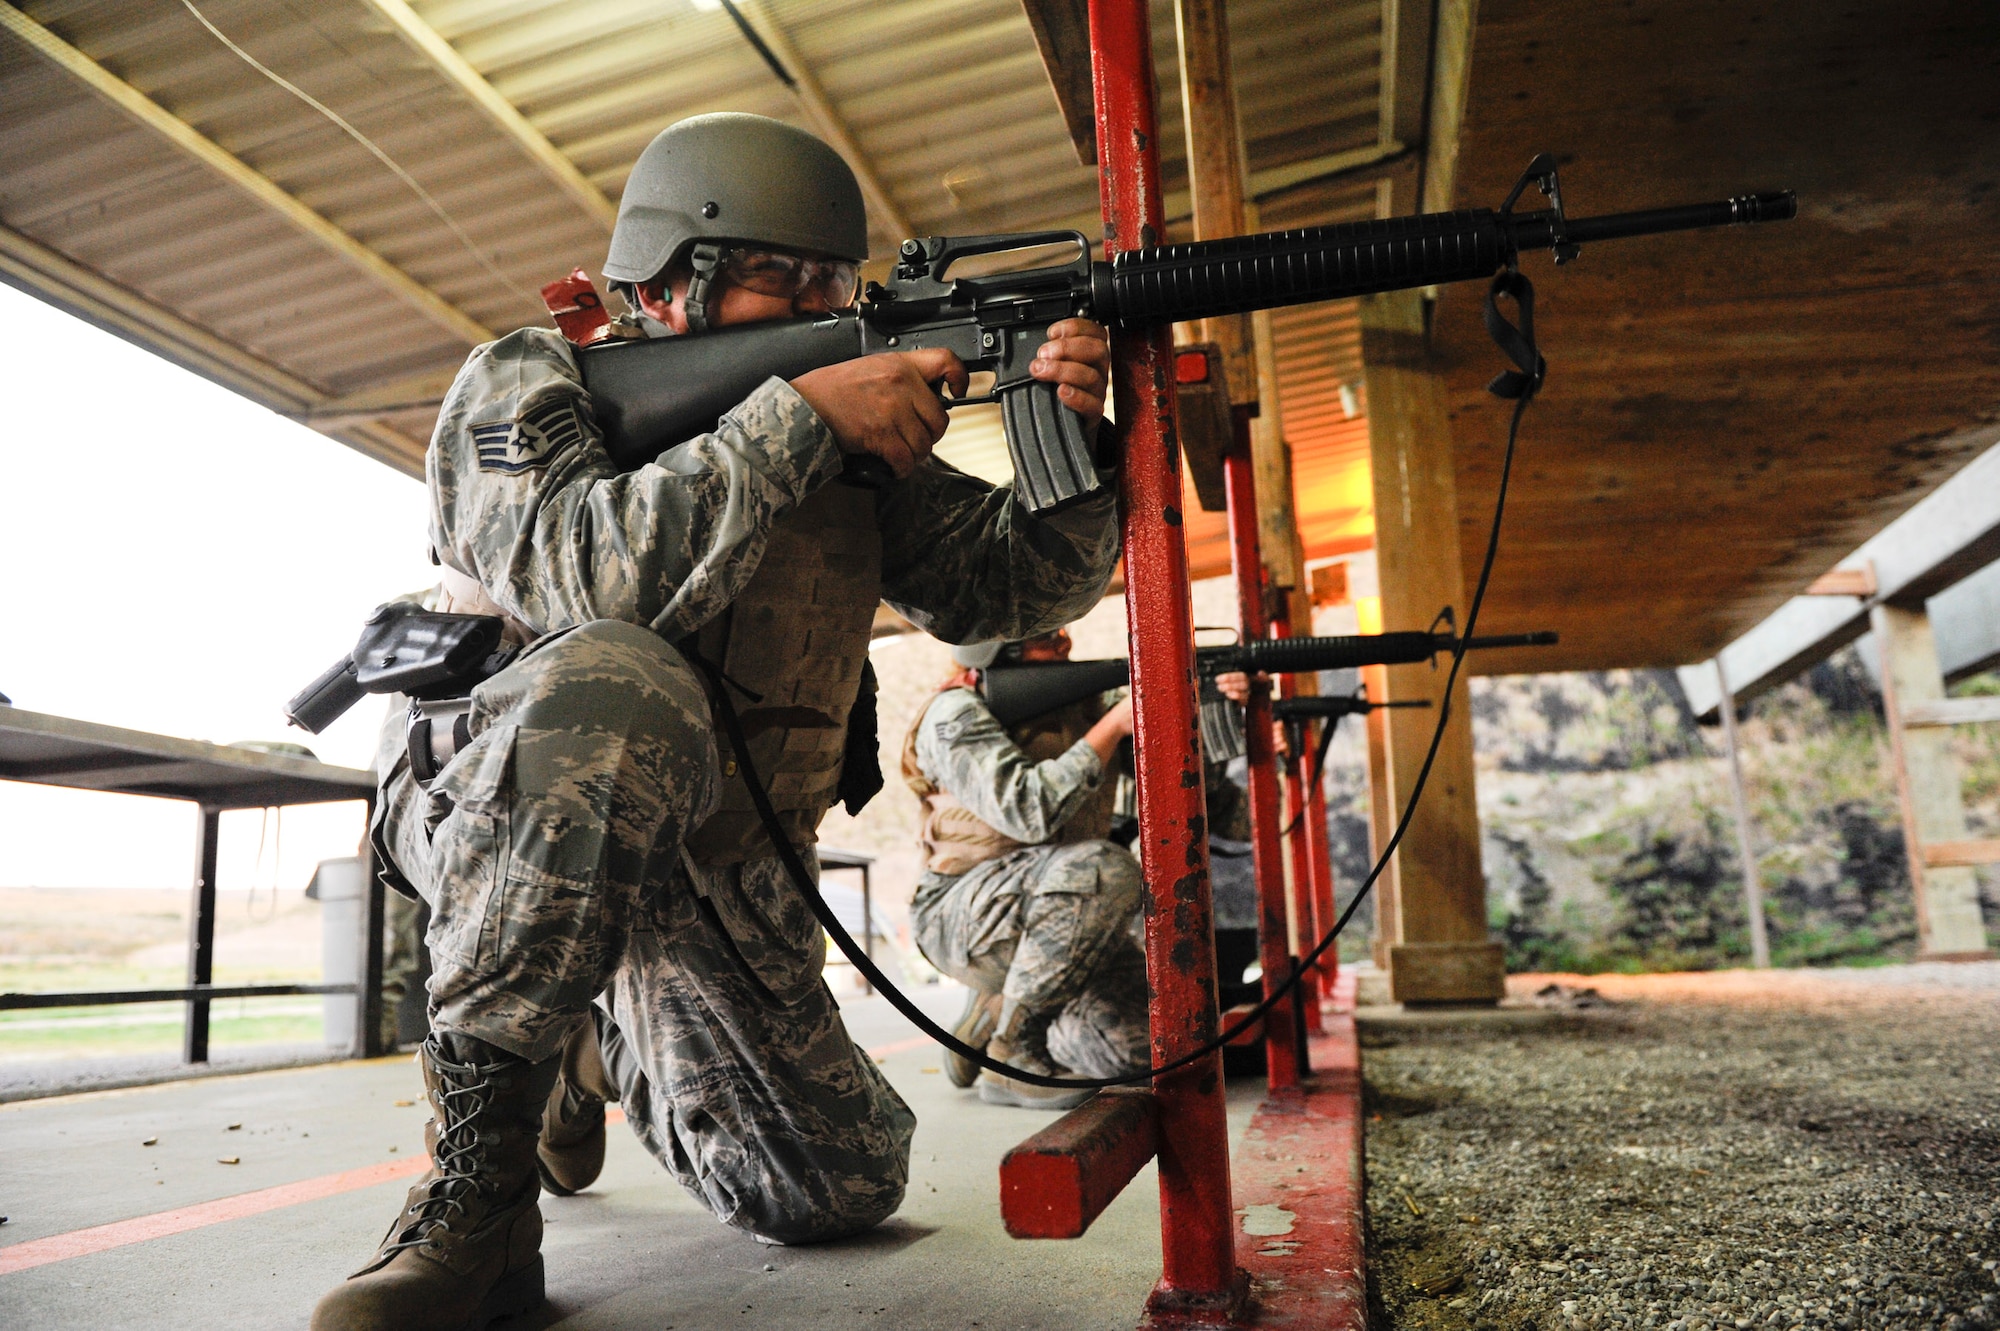 VANDENBERG AIR FORCE BASE, Calif. -- Staff Sgt. Bien Covita, a 30th Comptroller Squadron deputy dispersing officer, fires an M16 rifle during the first class of the new Rifle Carbine Air Force Qualification course here Tuesday, Dec. 6, 2011. The new course, in which Airman fire nearly double the amount of rounds of the previous course, contains both basic firing positions (prone, sitting, kneeling, standing) and advanced tactical movements. (U.S. Air Force/Staff Sgt. Levi Riendeau)